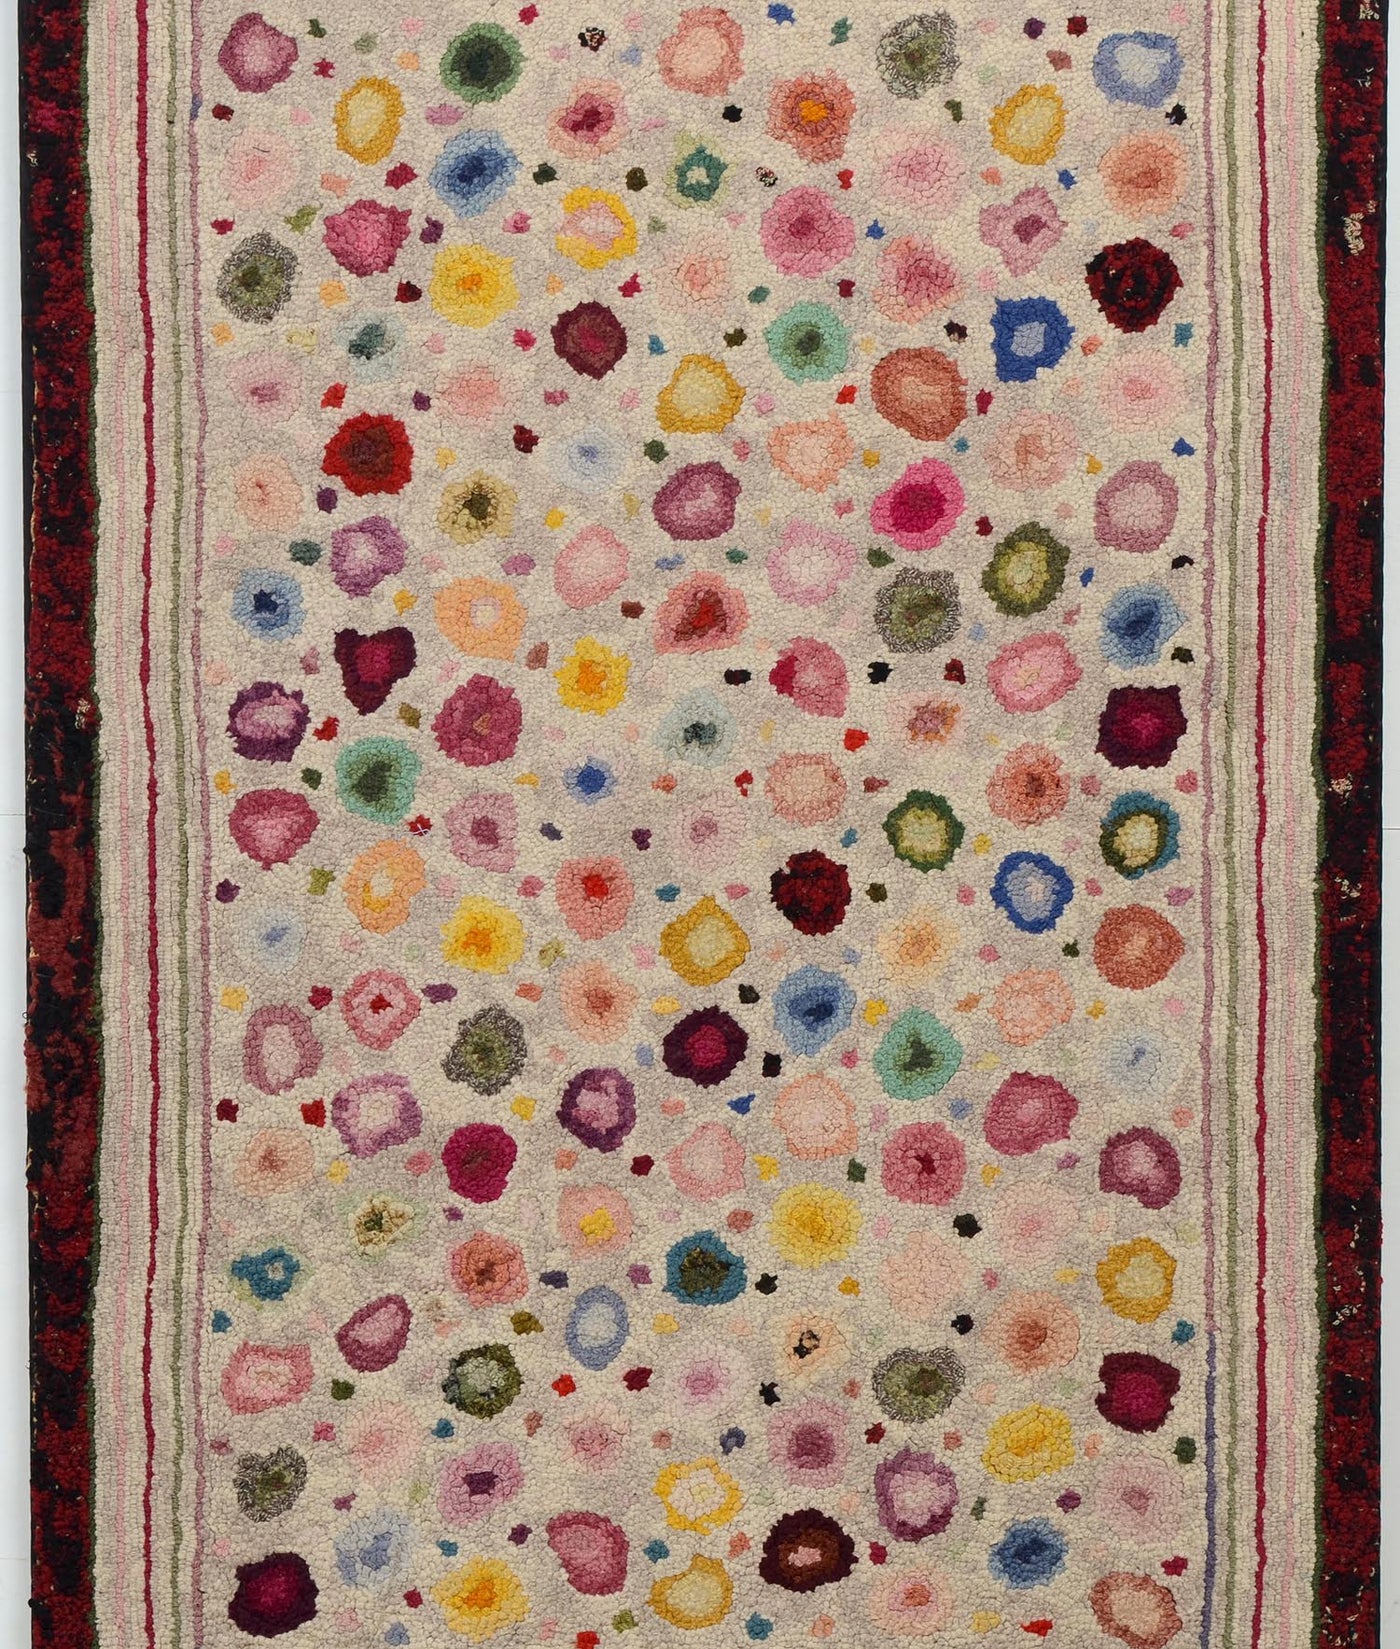 Cat's Paw Hooked Rug: Circa 1920